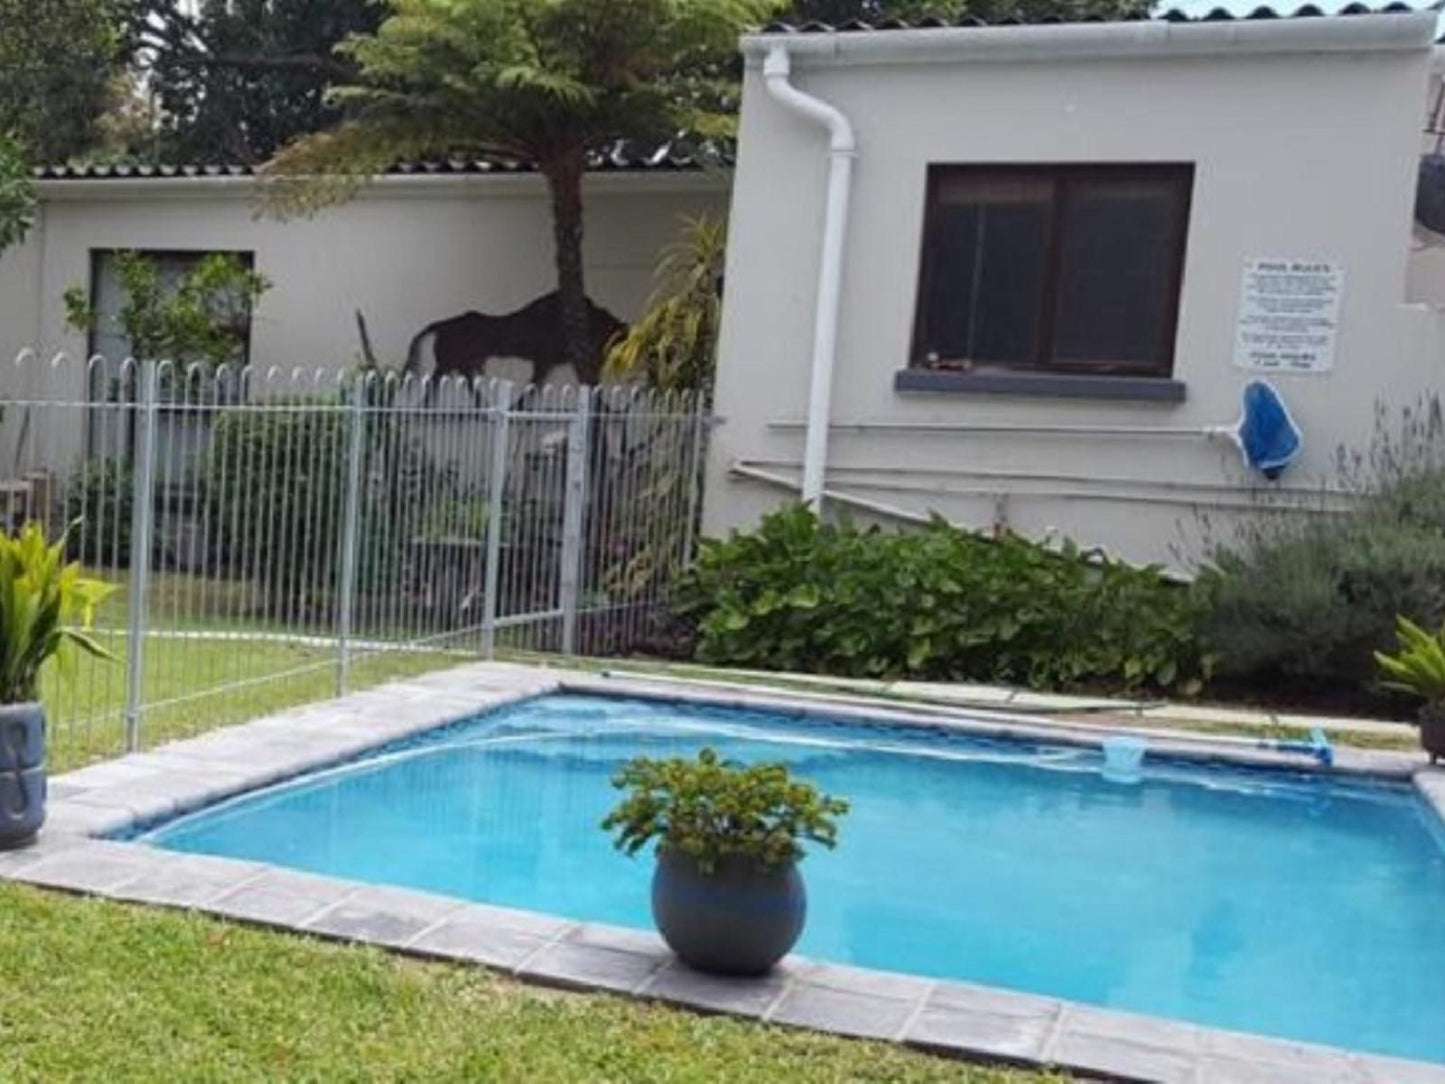 39 On Nile Guesthouse Perridgevale Port Elizabeth Eastern Cape South Africa House, Building, Architecture, Garden, Nature, Plant, Swimming Pool